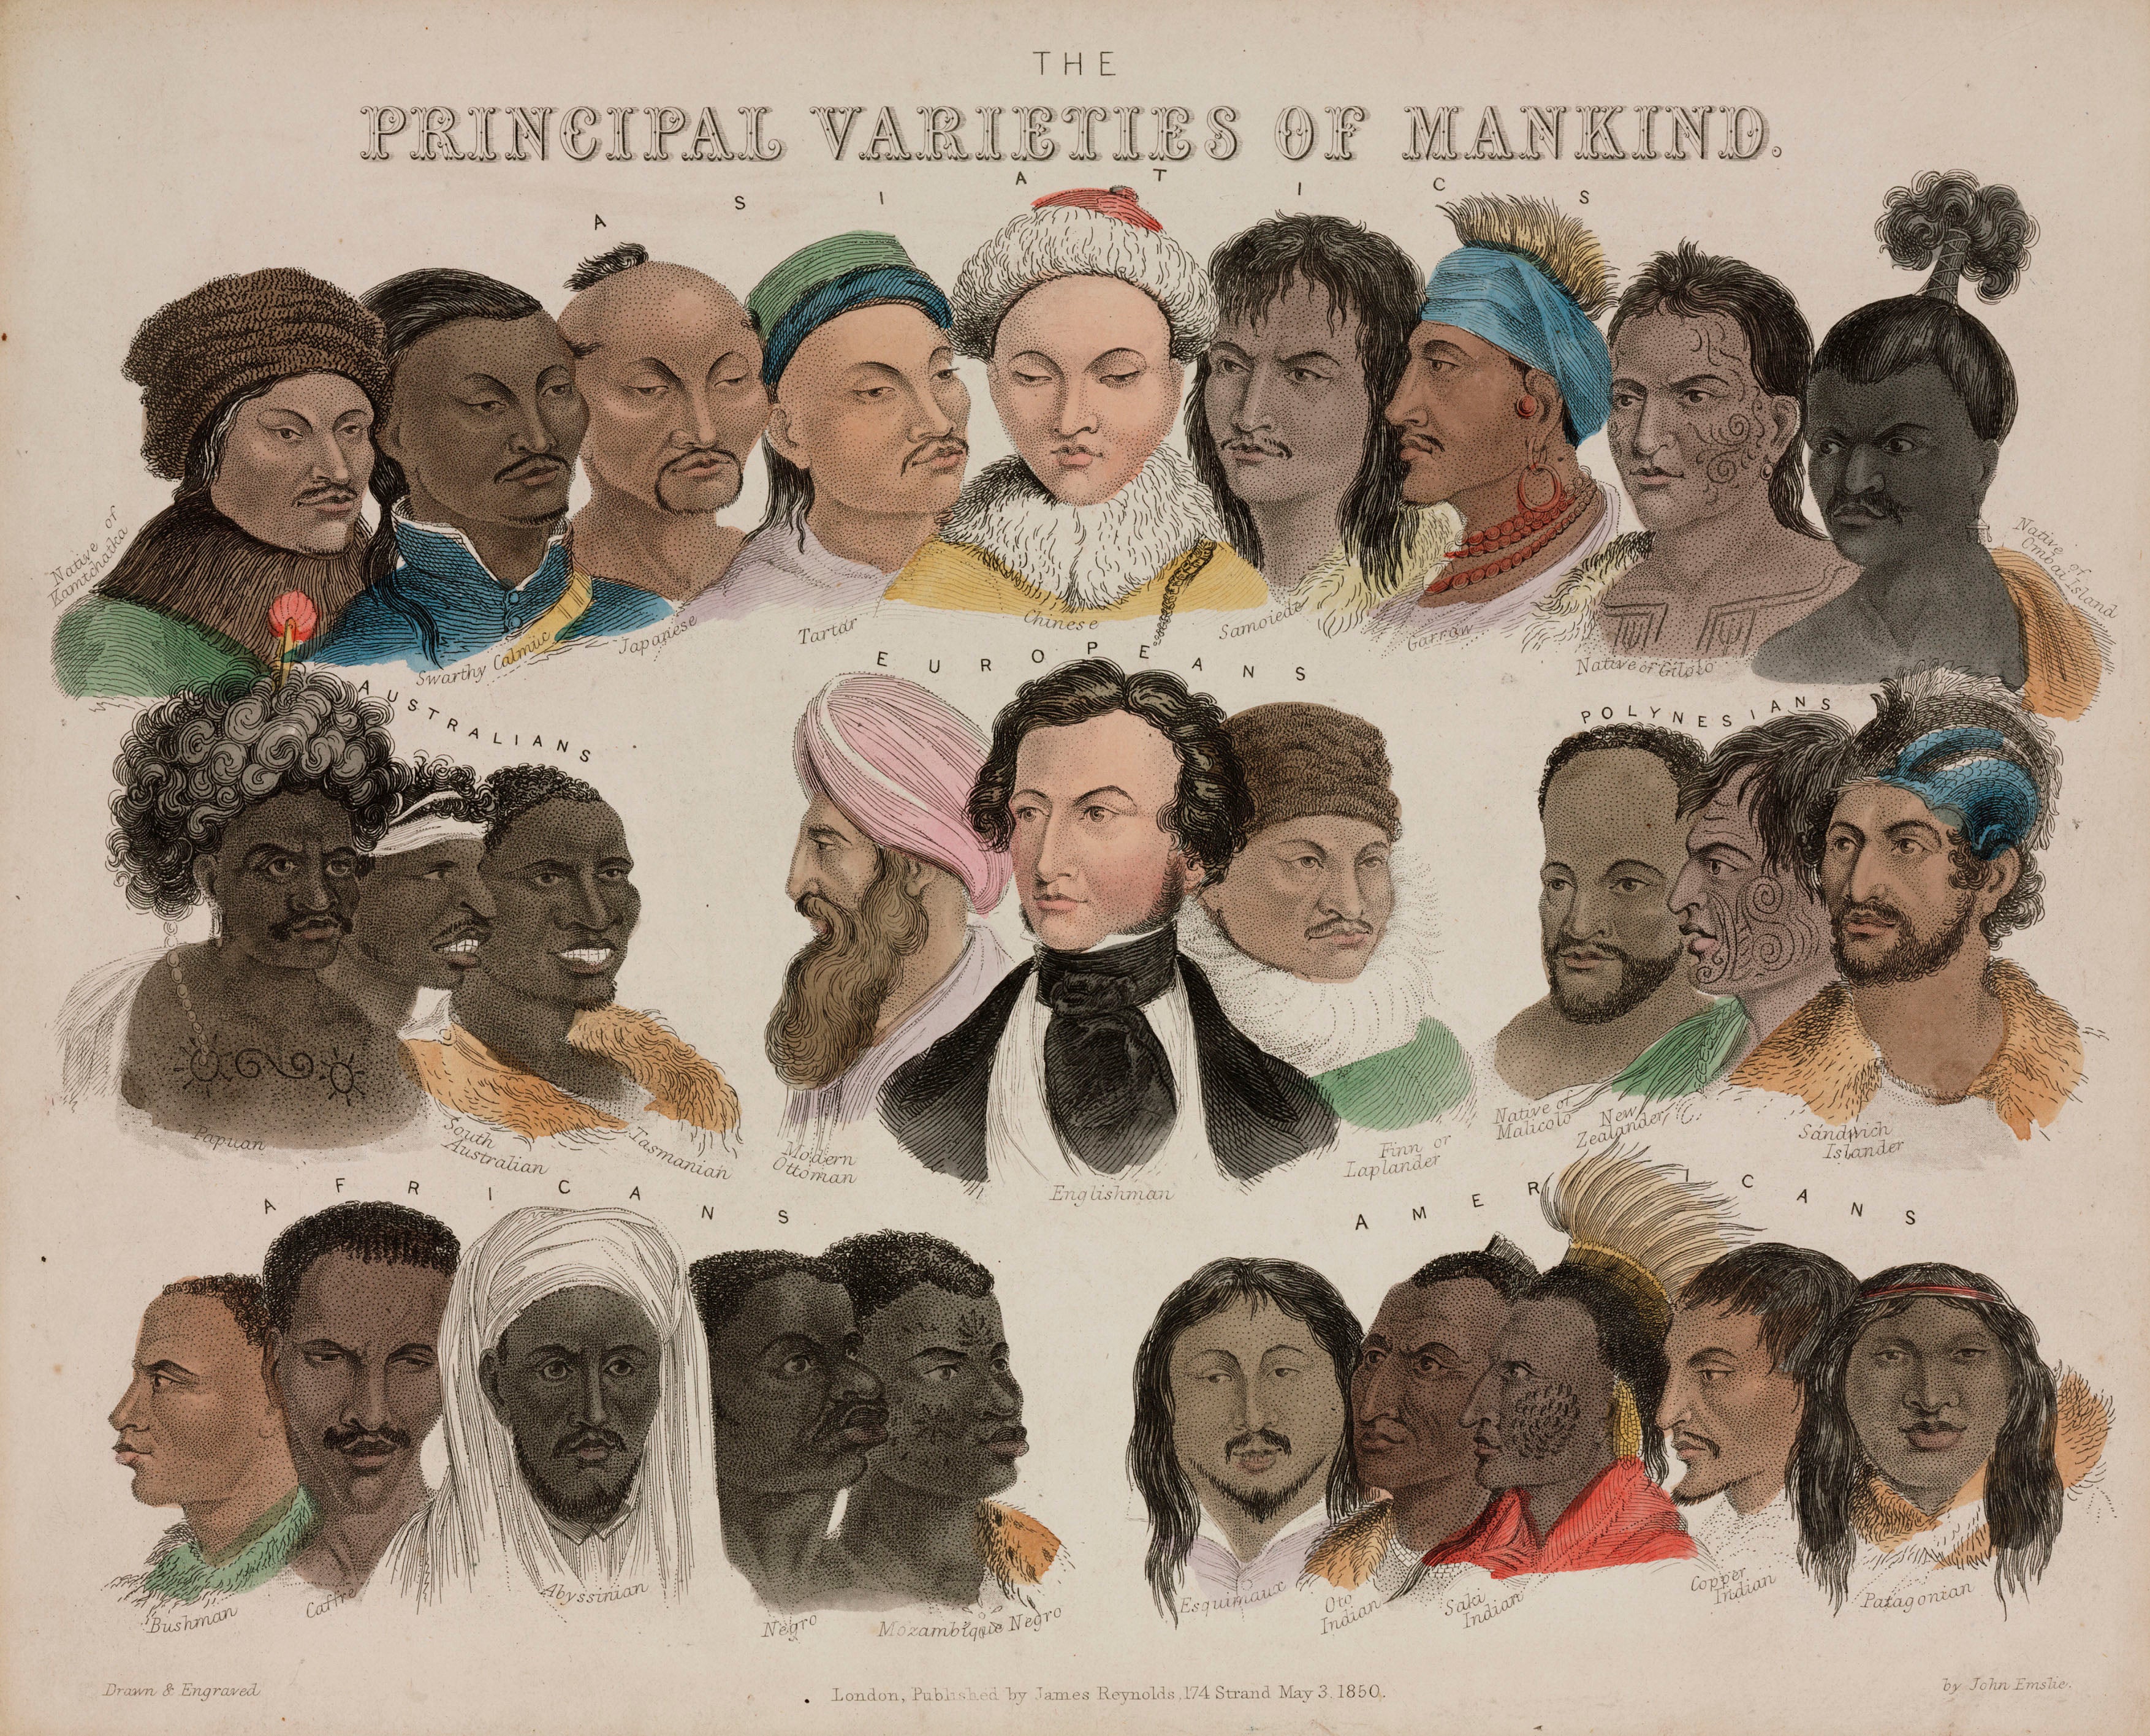 Portraits grouped under the headings: Asiatics, Australians, Europeans, Polynesians, Africans and Americans.